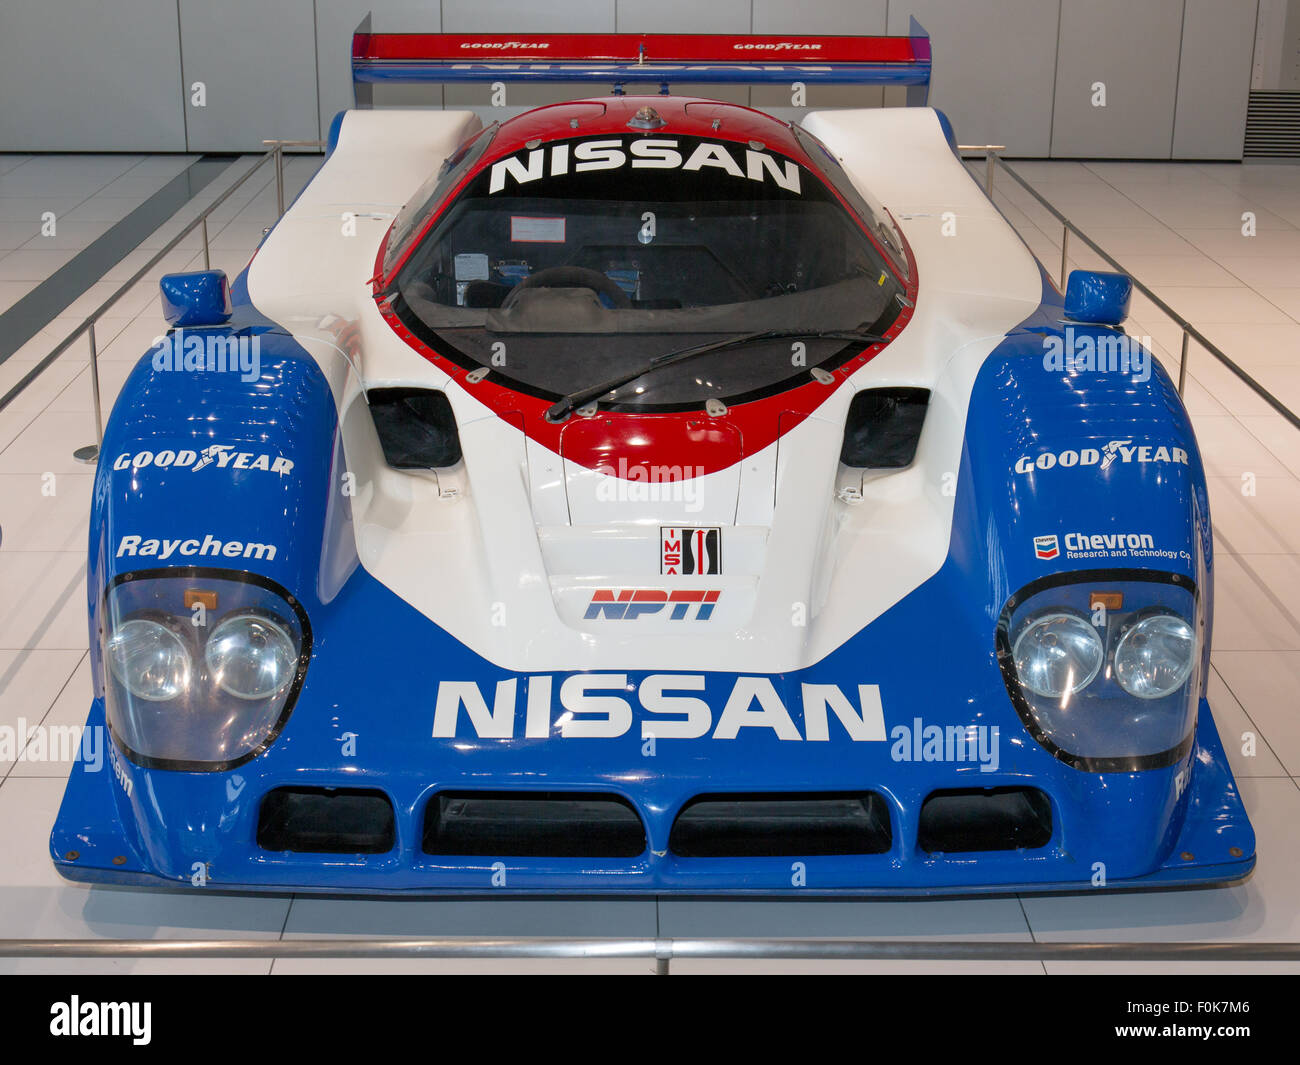 Nissan R90CK front 2015 Nissan Global Headquarters Gallery Stock Photo